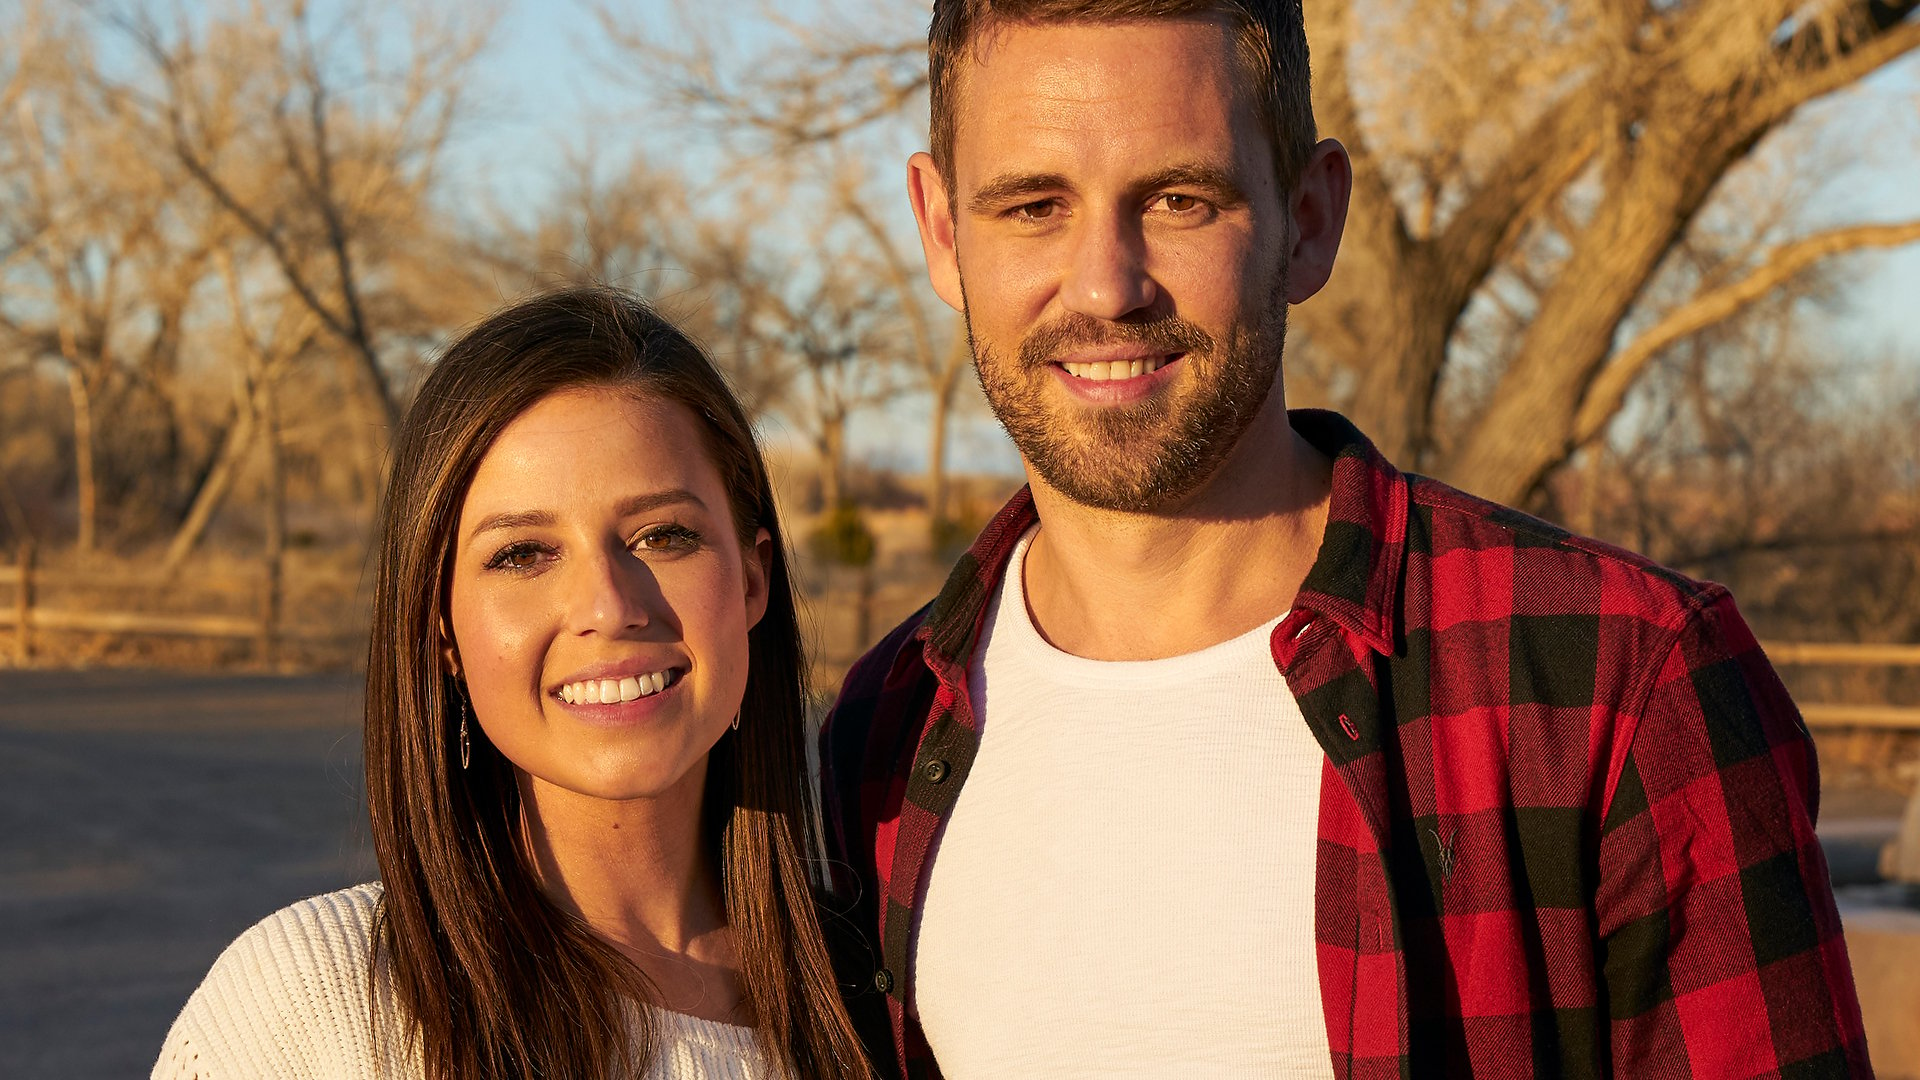 2021 lead Katie Thurston and Bachelor Nation alum Nick Viall pose together while filming ‘The Bachelorette’ Season 17 Episode 3 group date